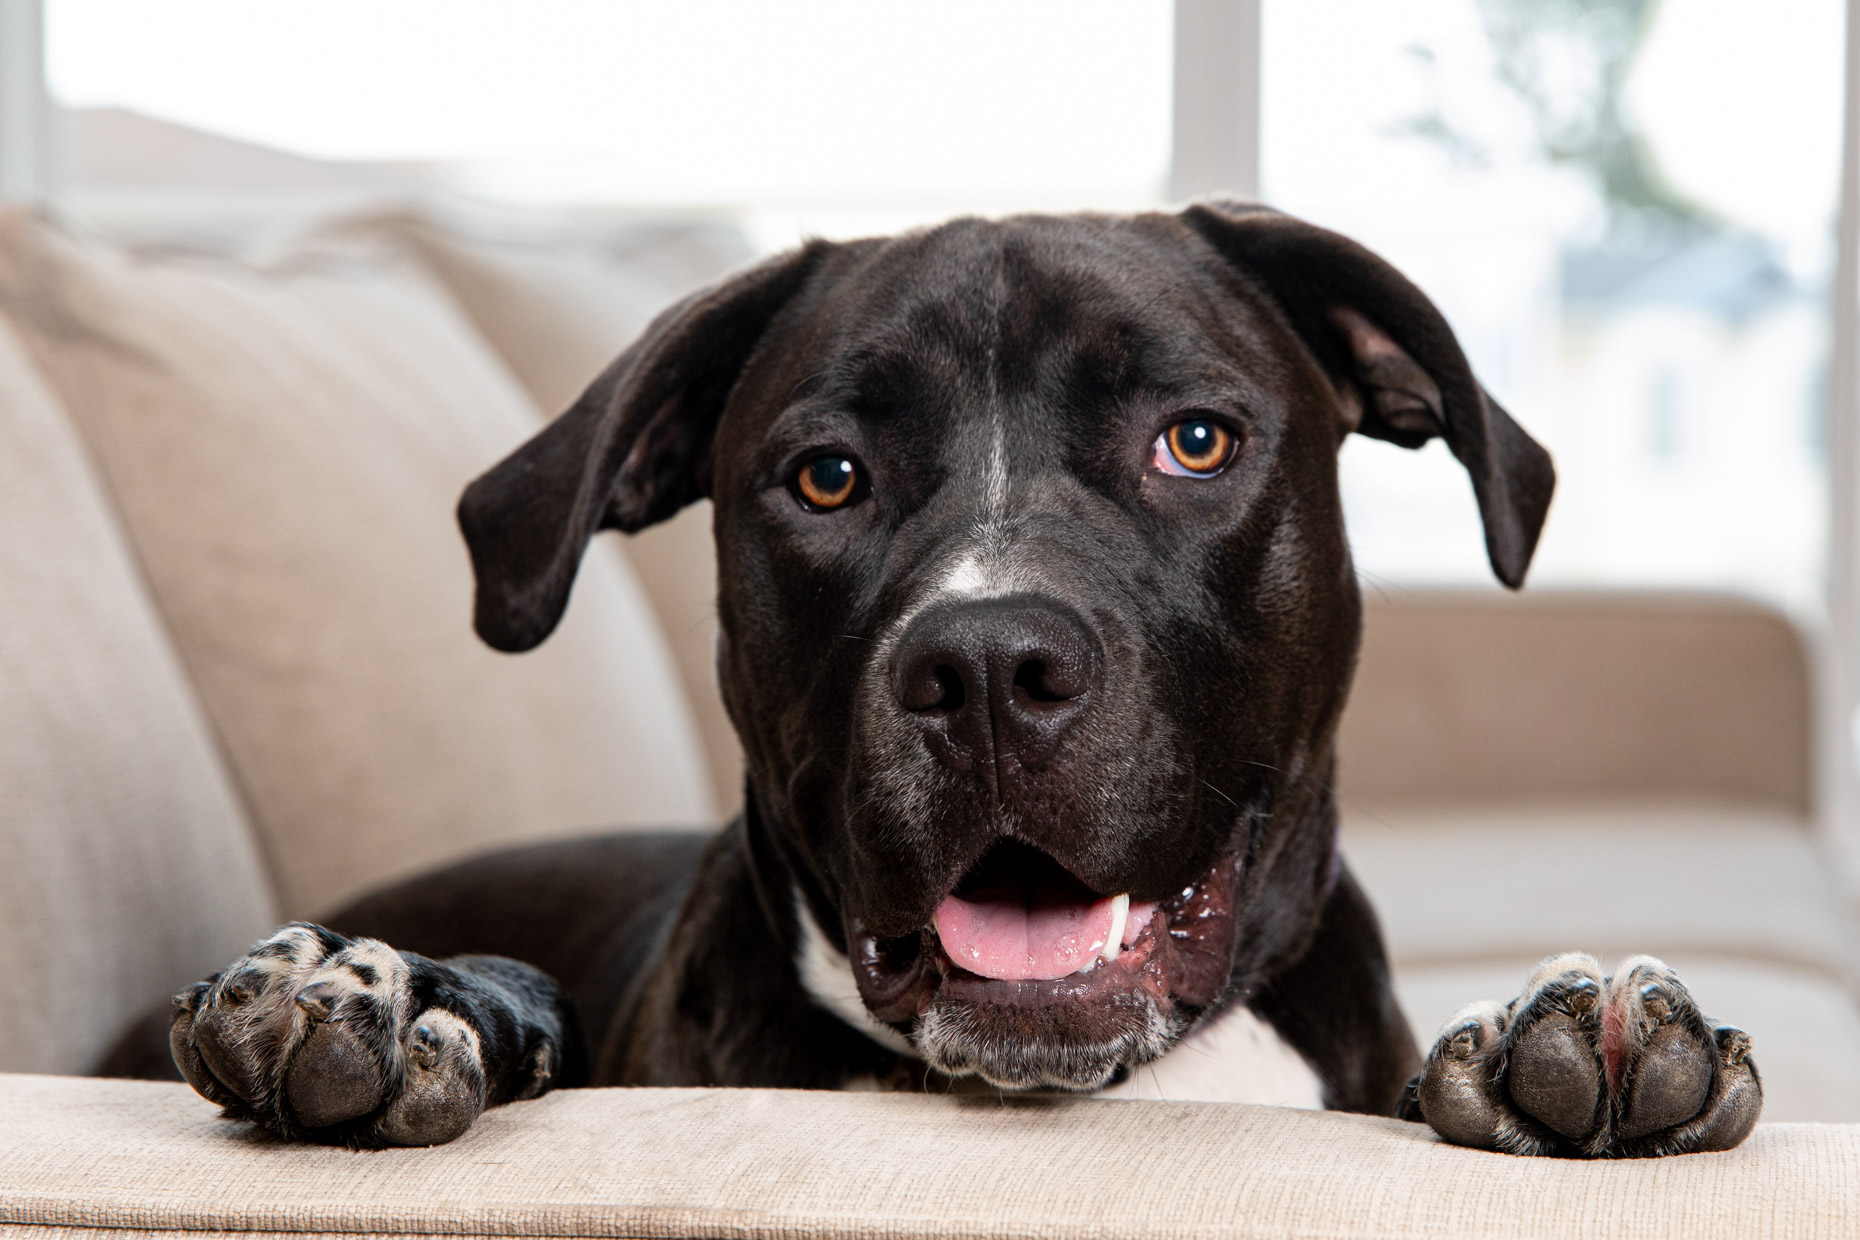 Dog and Pet Photography | Smiling  Pit Bull on Couch by Mark Rogers